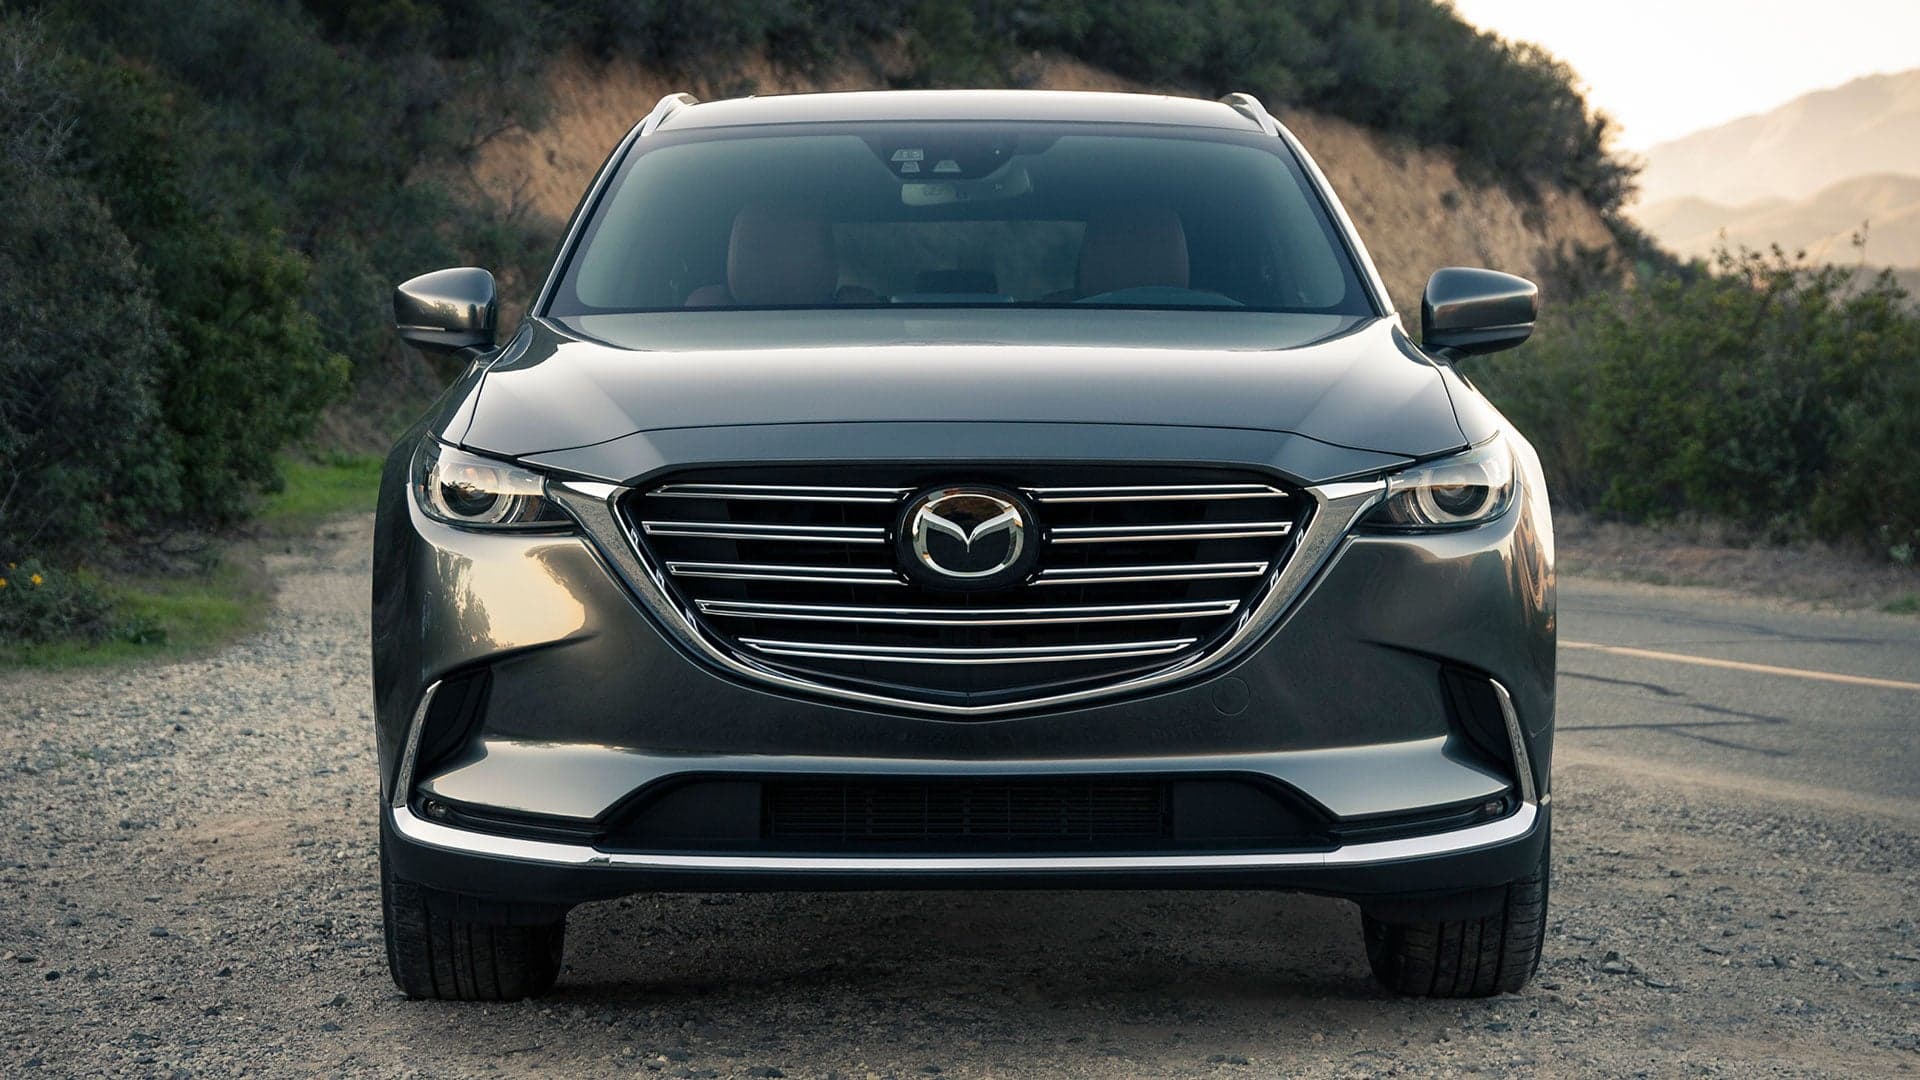 The 2016 Mazda CX-9 Signature Is a Family Crossover for Those Who Don’t Want a Family Crossover